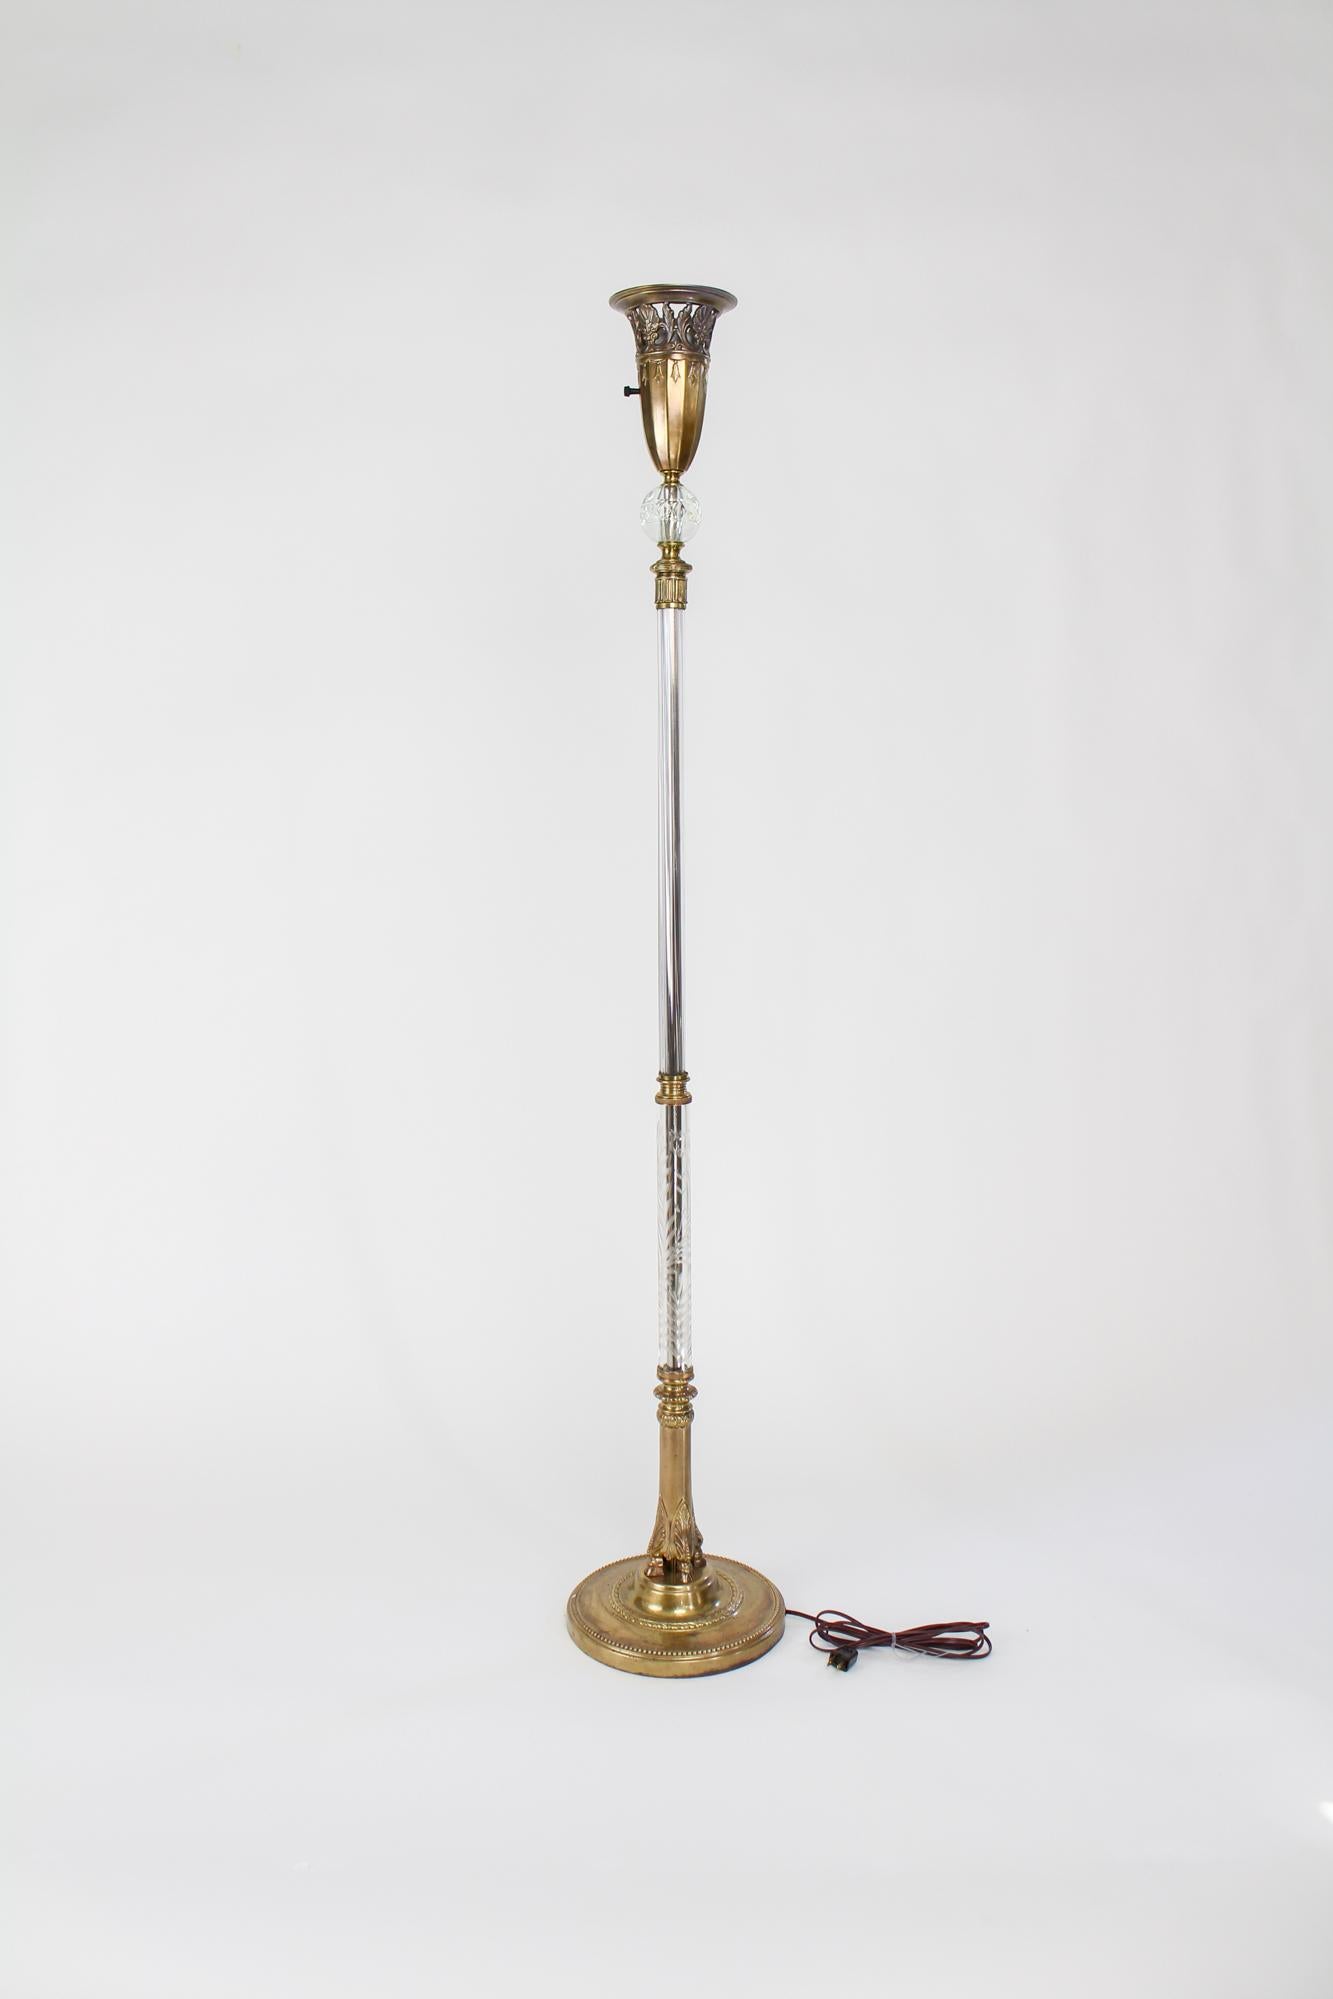 An American torchiere floor lamp from the 1930s. Original gold wash torchiere glass shade, shows some light wear as visible in photos, but no major chips or cracks. Glass tubing in excellent condition, with an etched botanical pattern winding up.